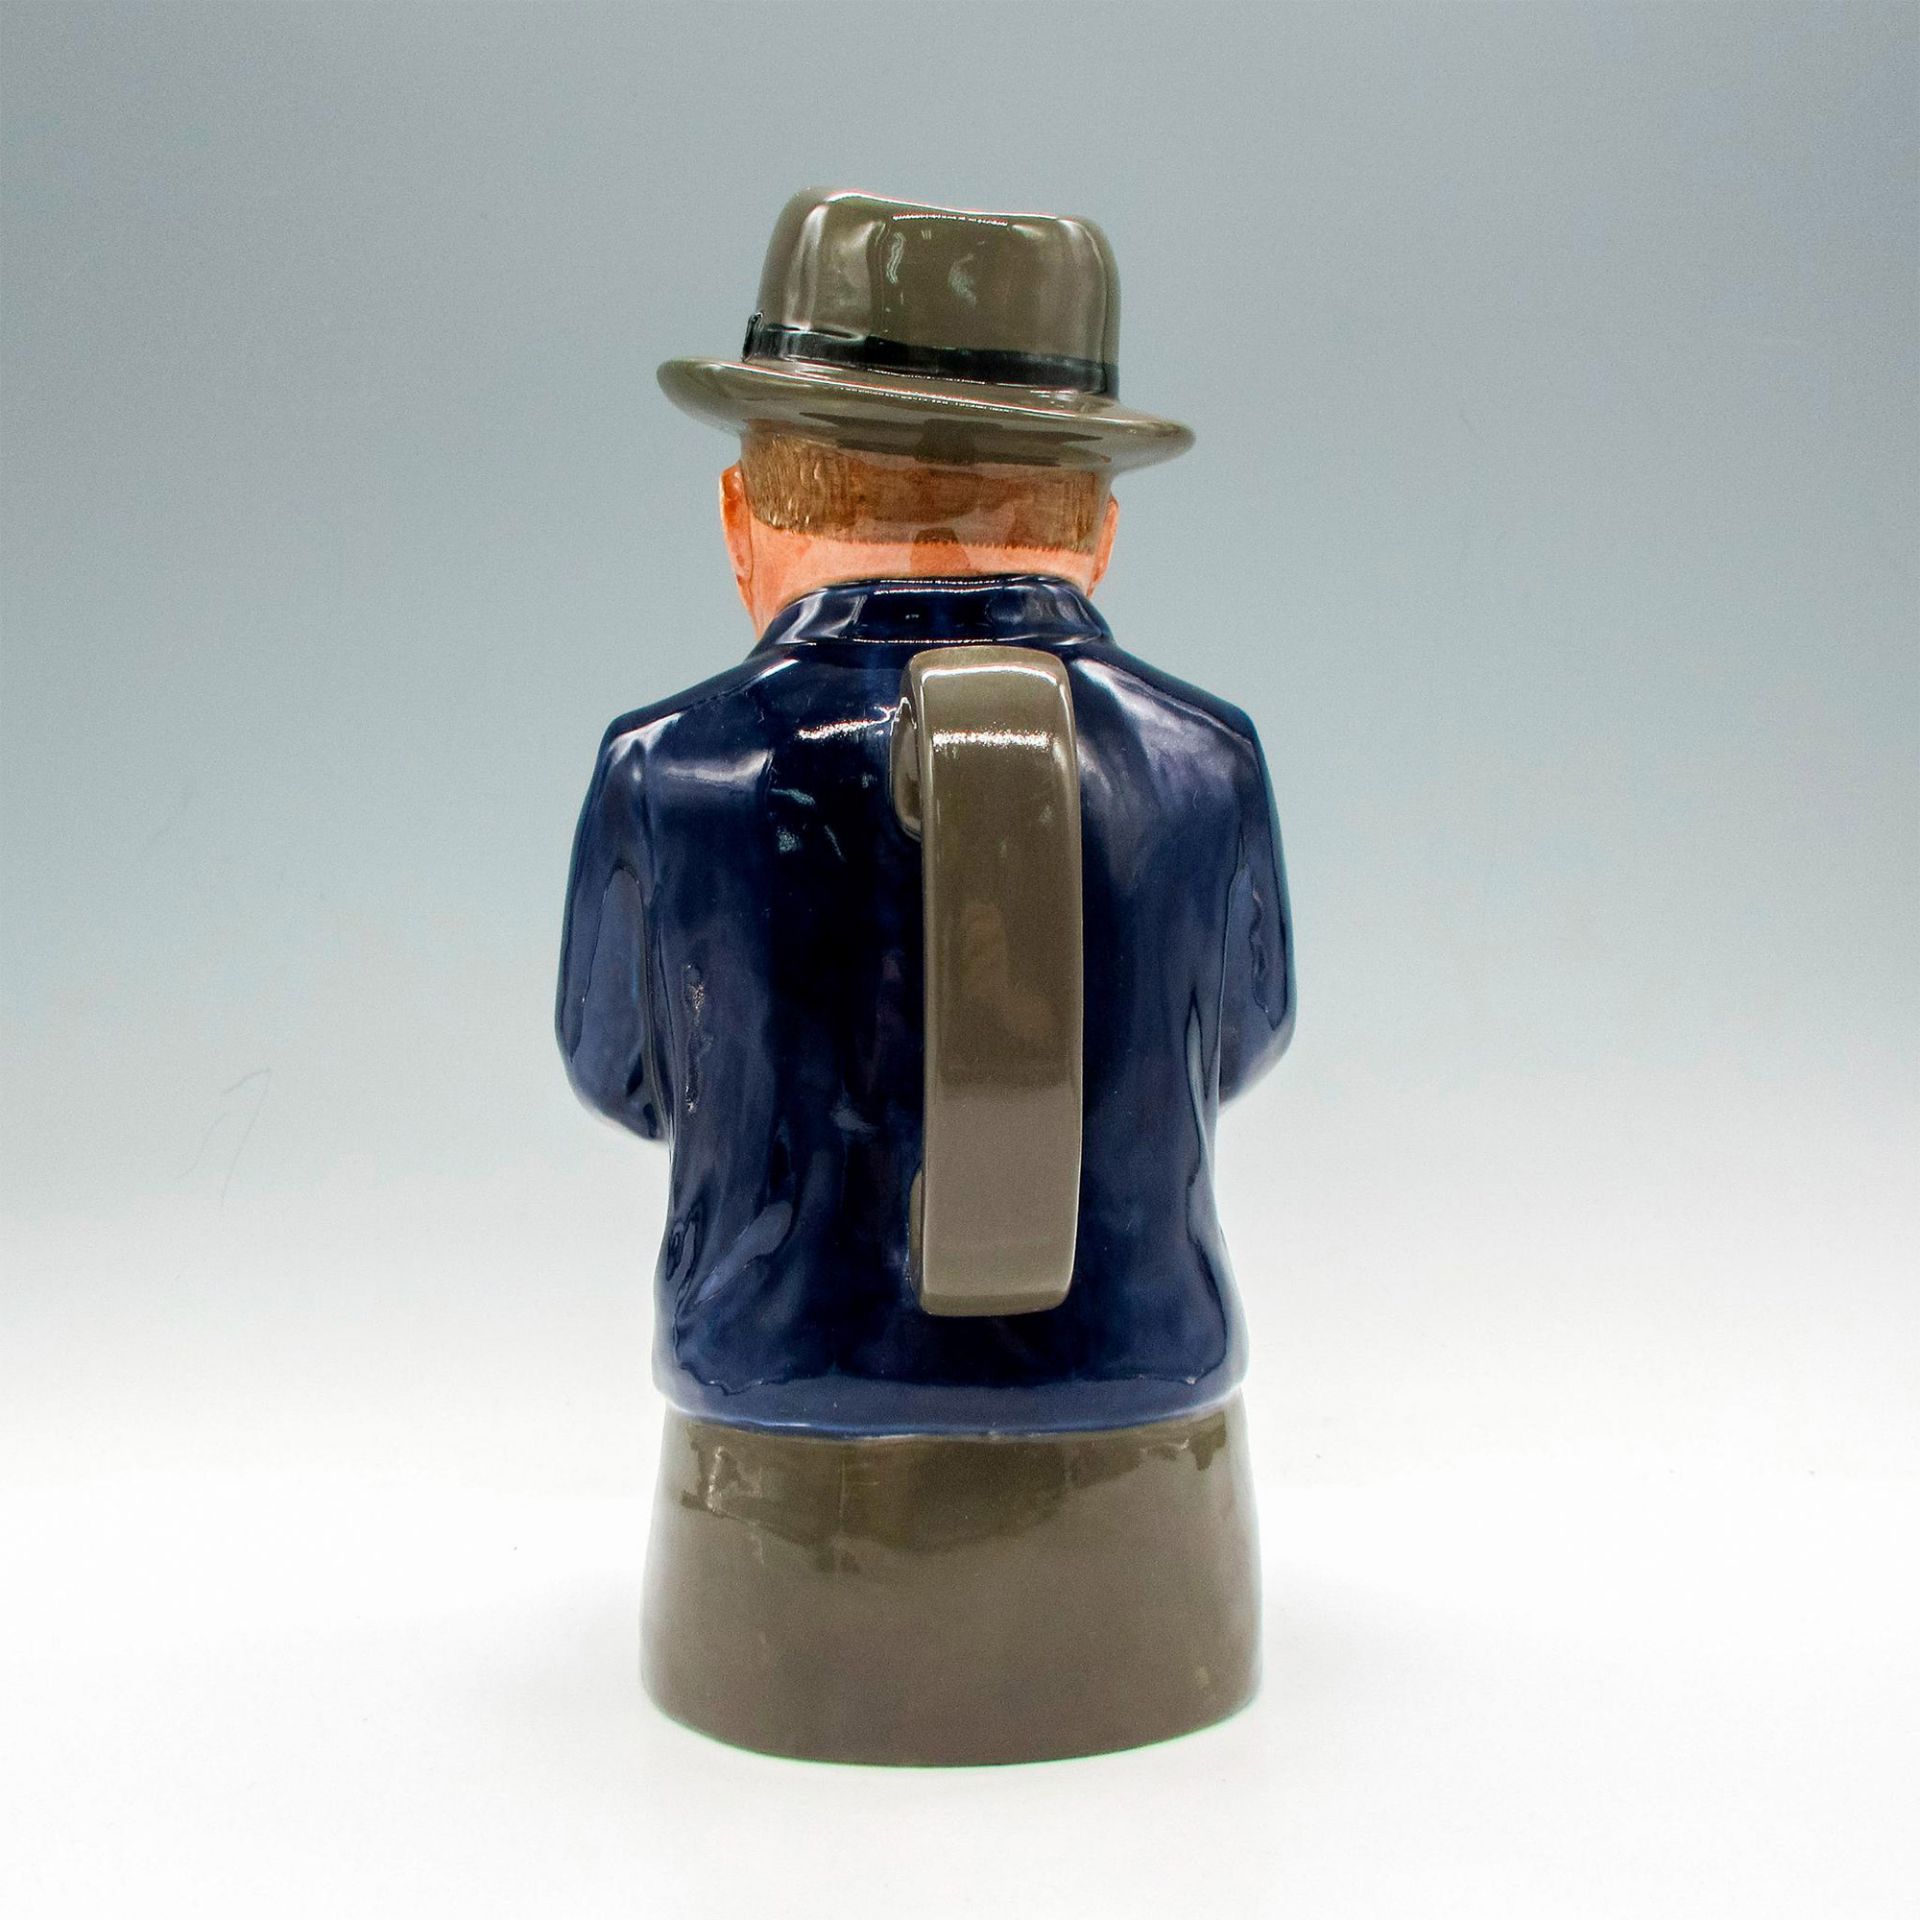 Cliff Cornell (Dark Blue Suit, Large) - Royal Doulton Toby Jug - Image 2 of 3